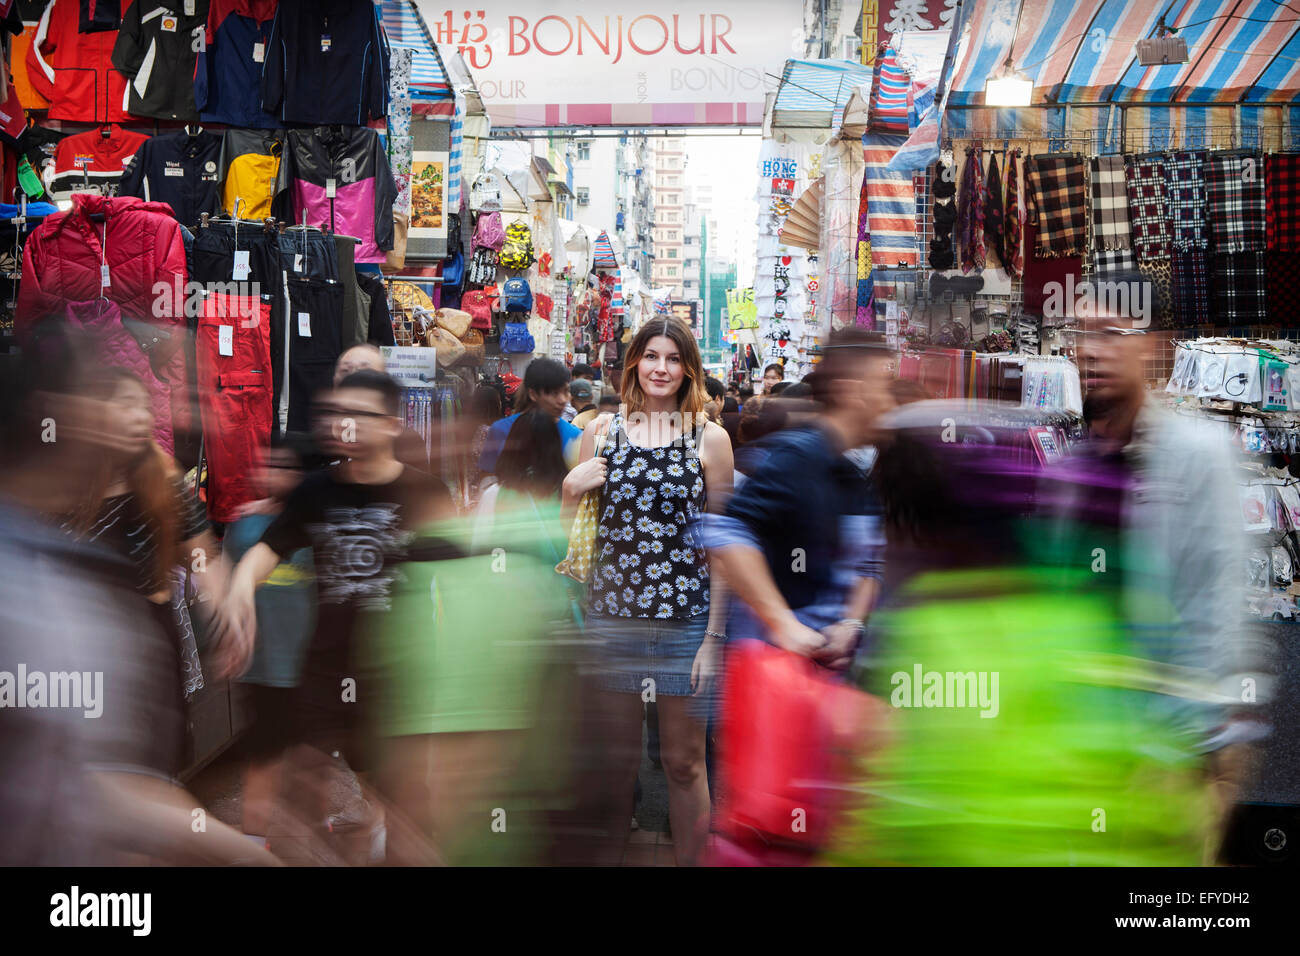 A woman shopping in a crowded street market in Hong Kong Stock Photo